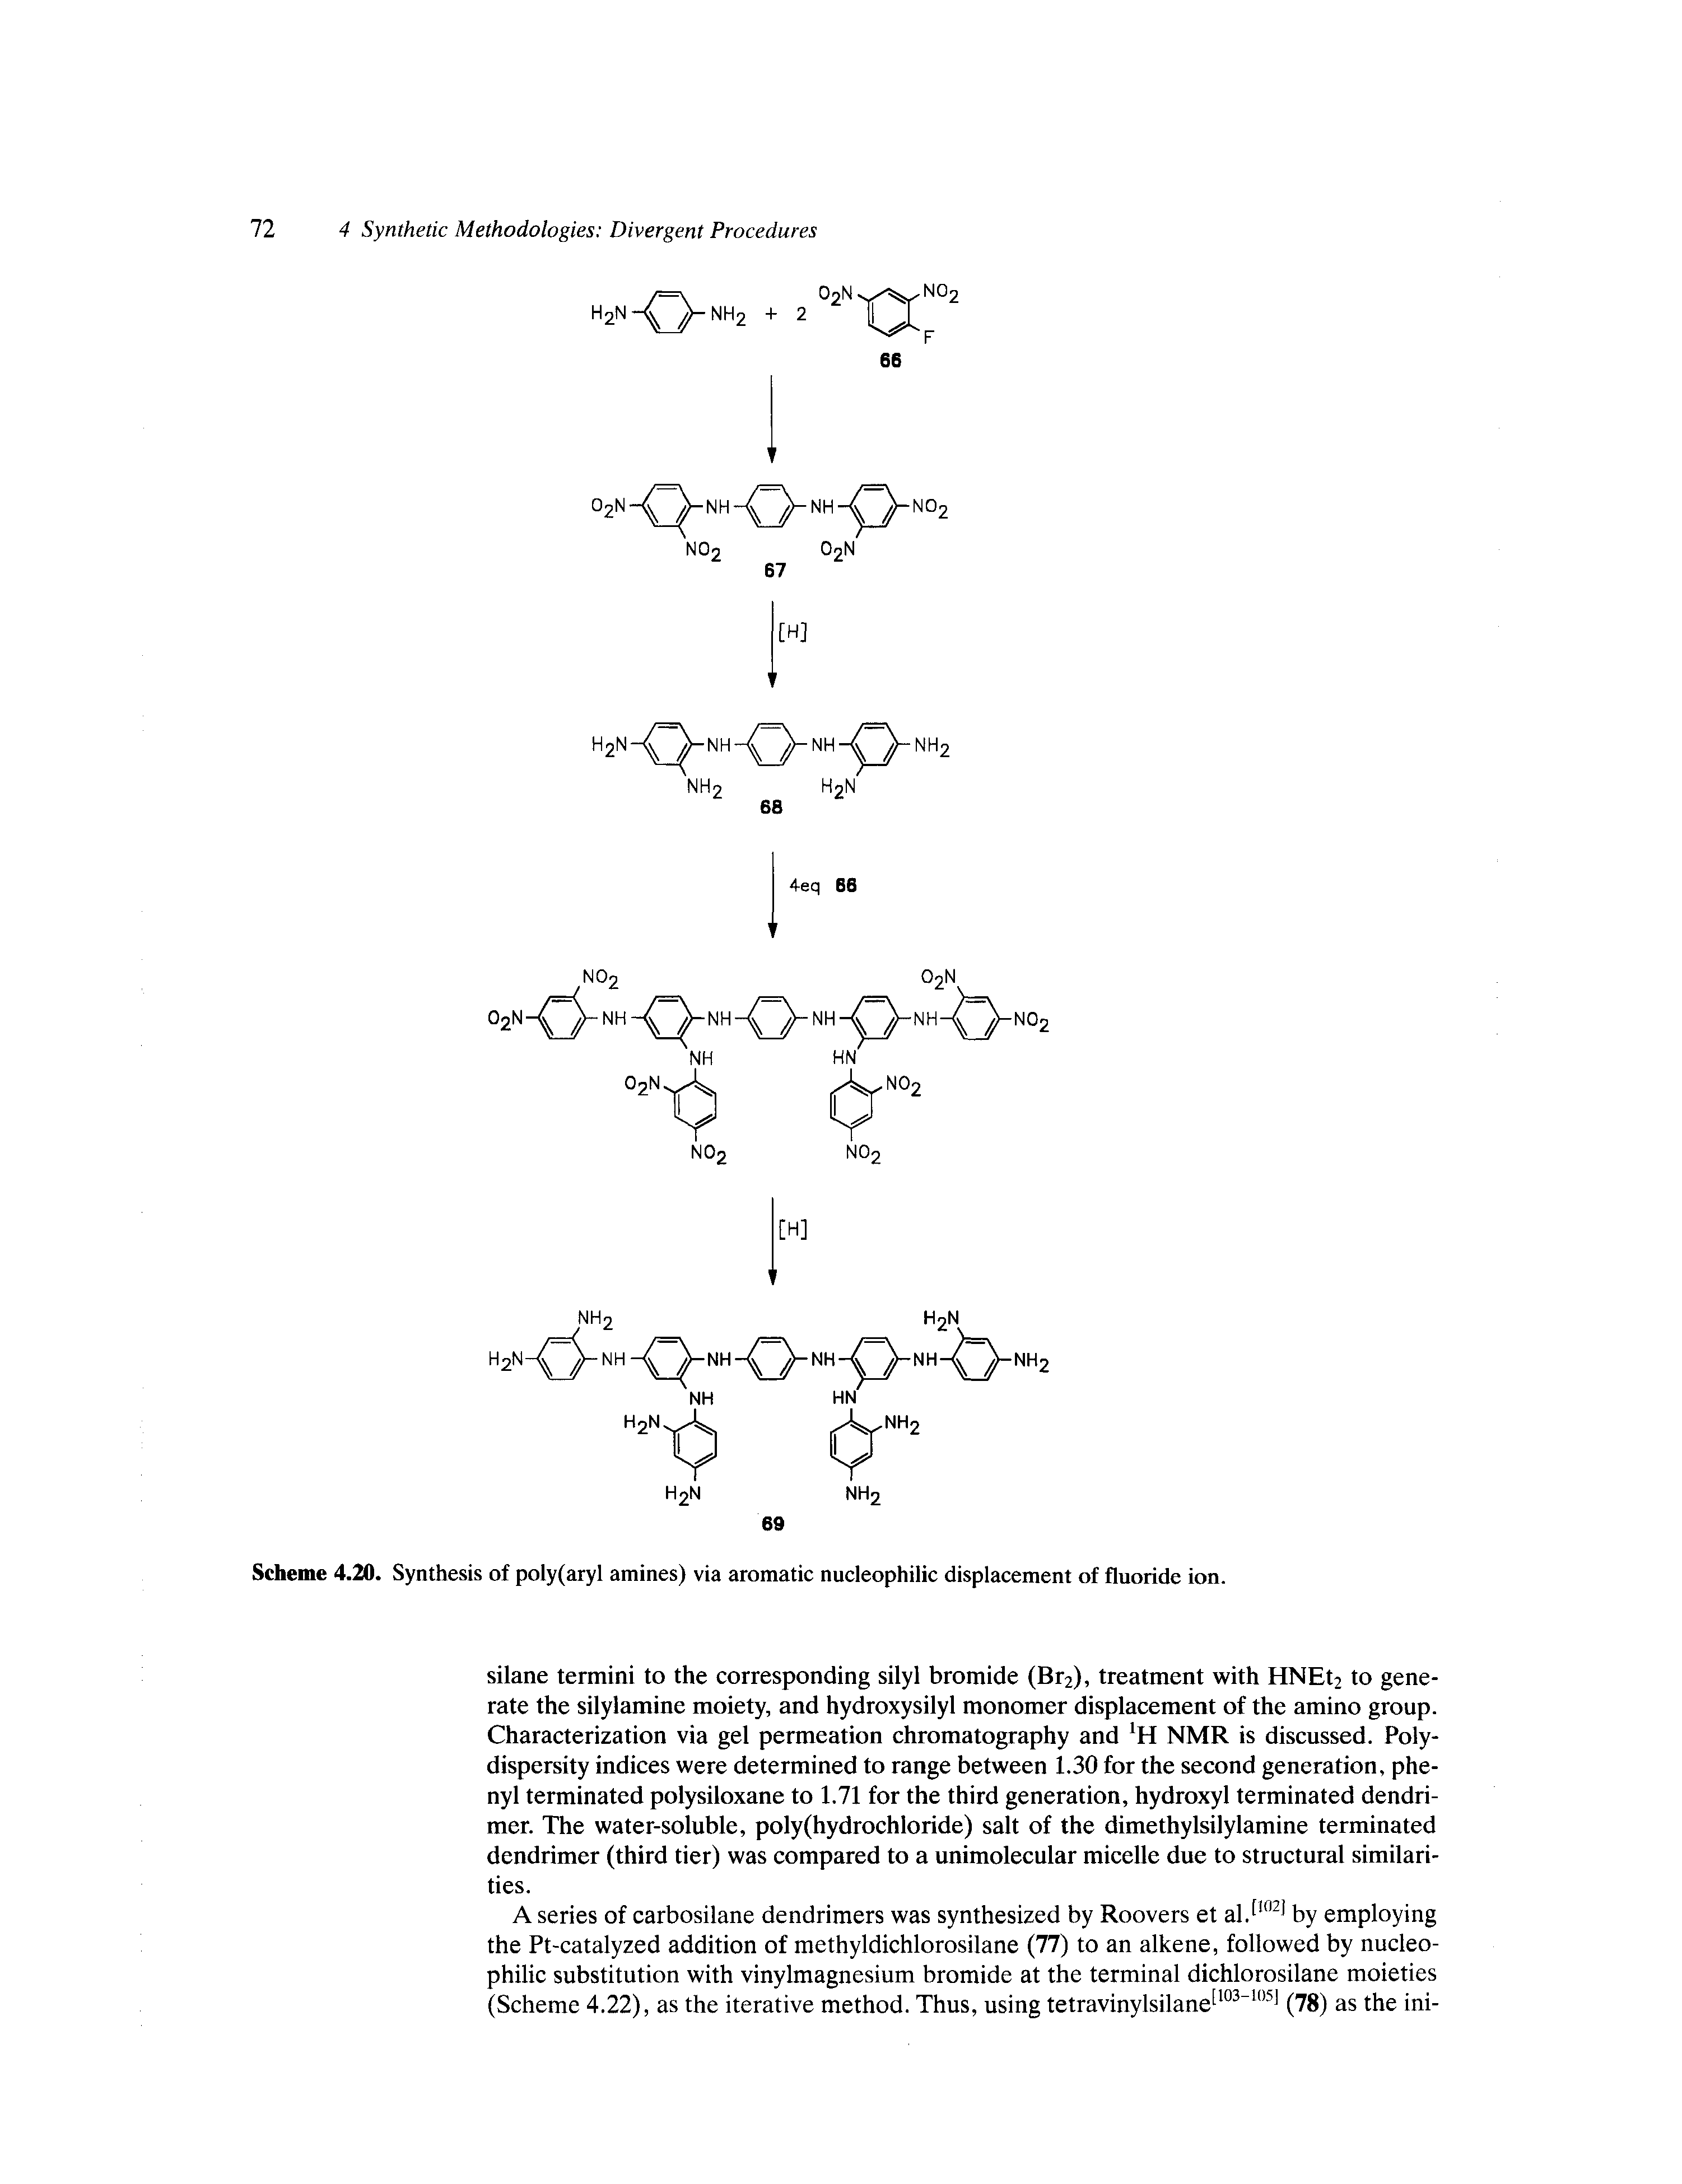 Scheme 4.20. Synthesis of poly(aryl amines) via aromatic nucleophilic displacement of fluoride ion.